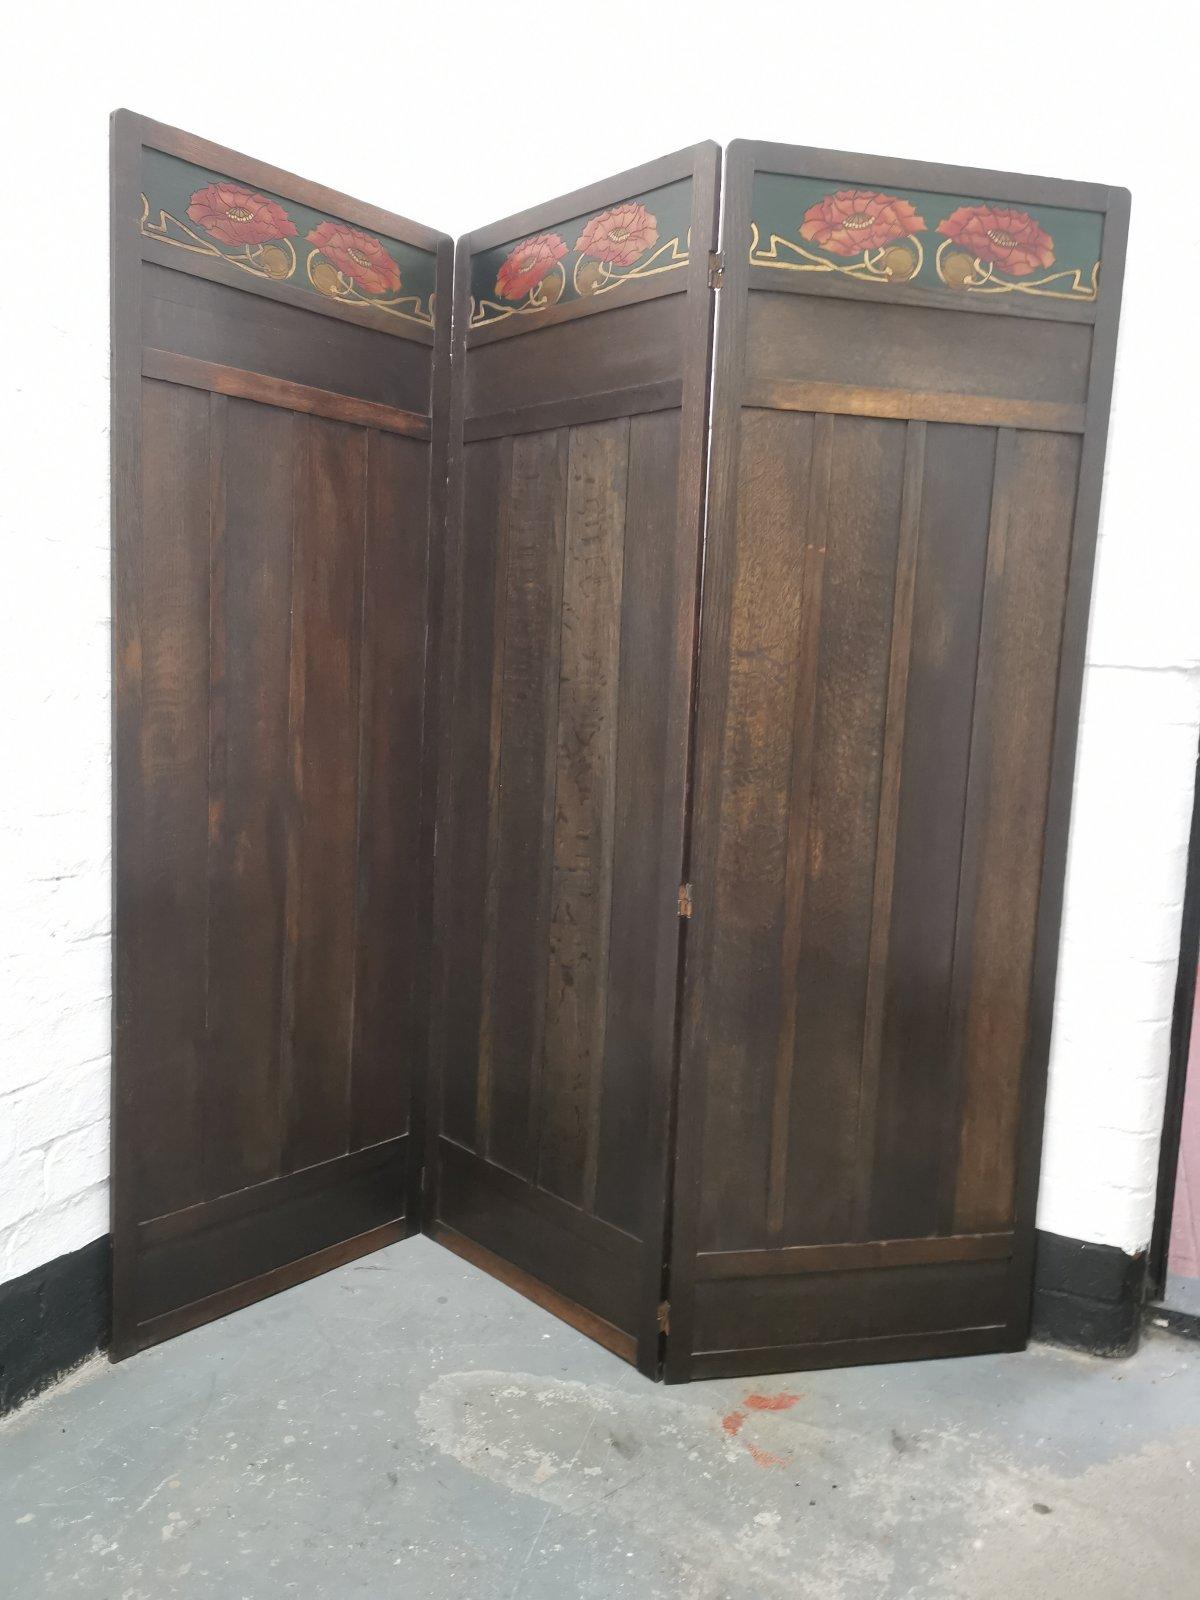 Liberty & Co. An English Arts & Crafts three-fold panelled oak screen with stylized carved and painted floral details to the top.
The height is 58 inches, fully extended it measures 59 inches, each panel is 19.75inches wide and 1/2 an inch thick.